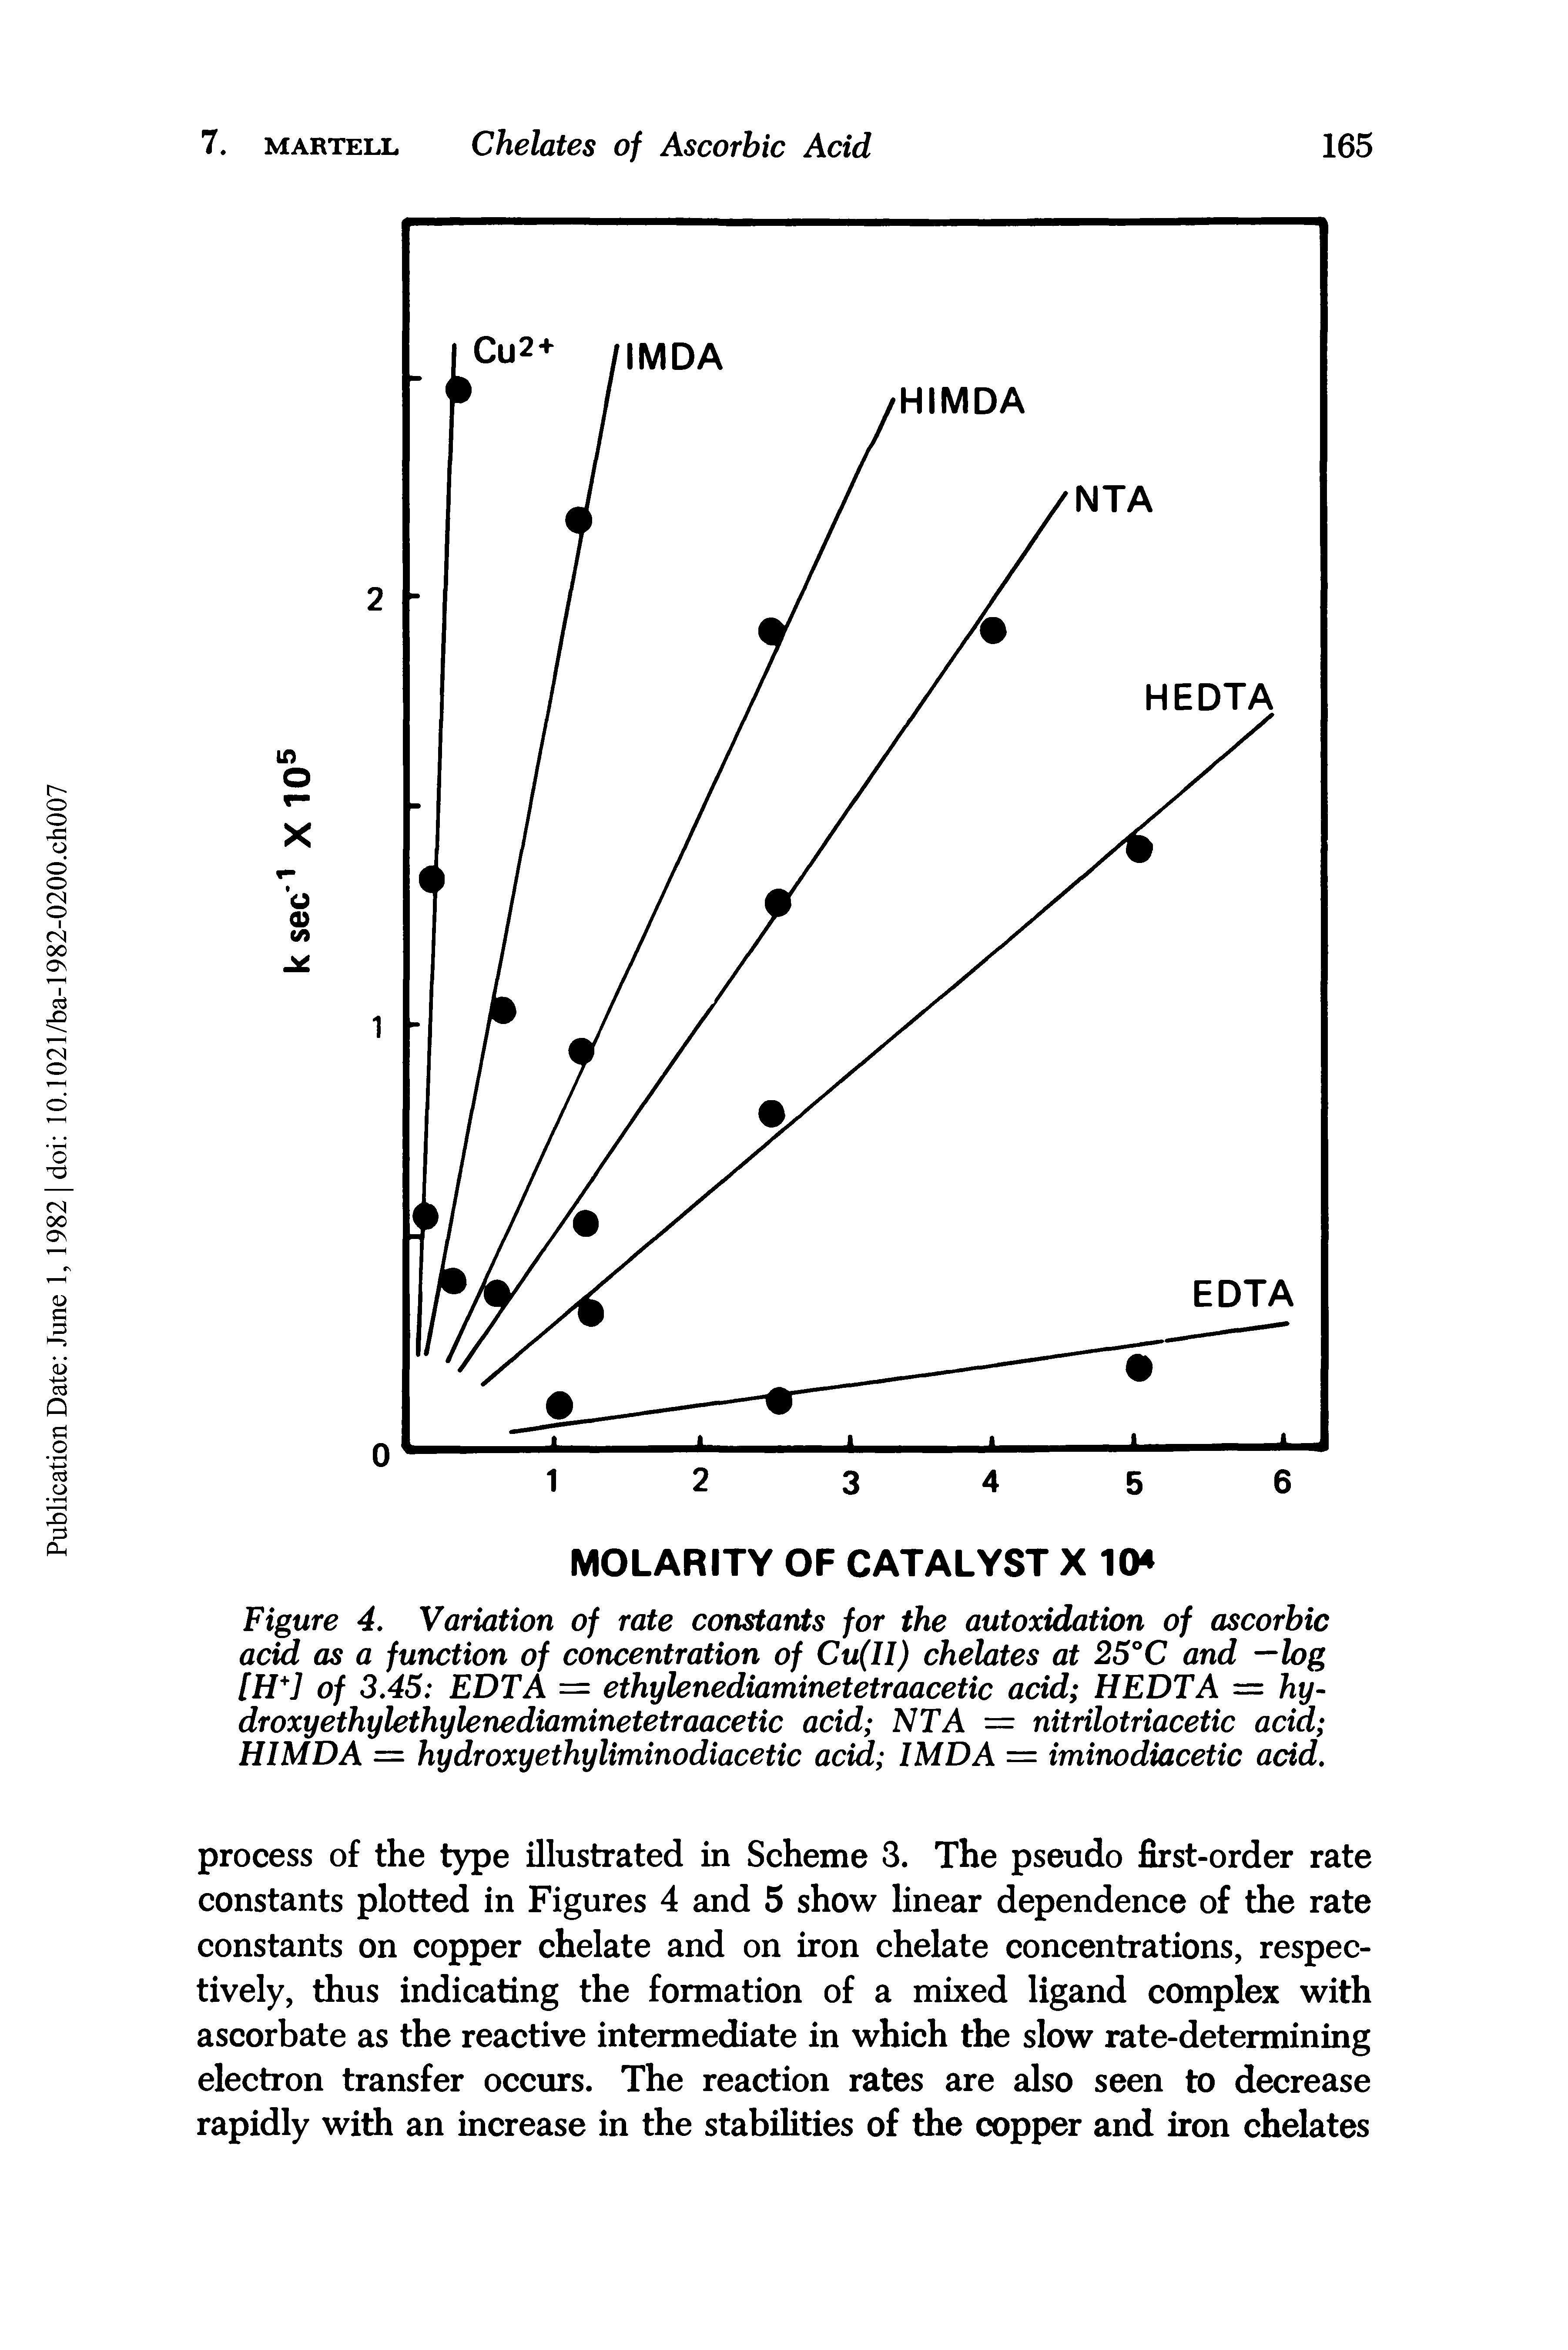 Figure 4, Variation of rate constants for the autoxidation of ascorbic acid as a function of concentration of Cu(ll) chelates at 25°C and - log [H ] of 3.45 EDTA = ethylenediaminetetraacetic acid HEDTA = hy-droxyethylethylenediaminetetraacetic acid NT A = nitrilotriacetic acid HIMDA = hydroxyethyliminodiacetic acid IMDA = iminodiacetic acid.